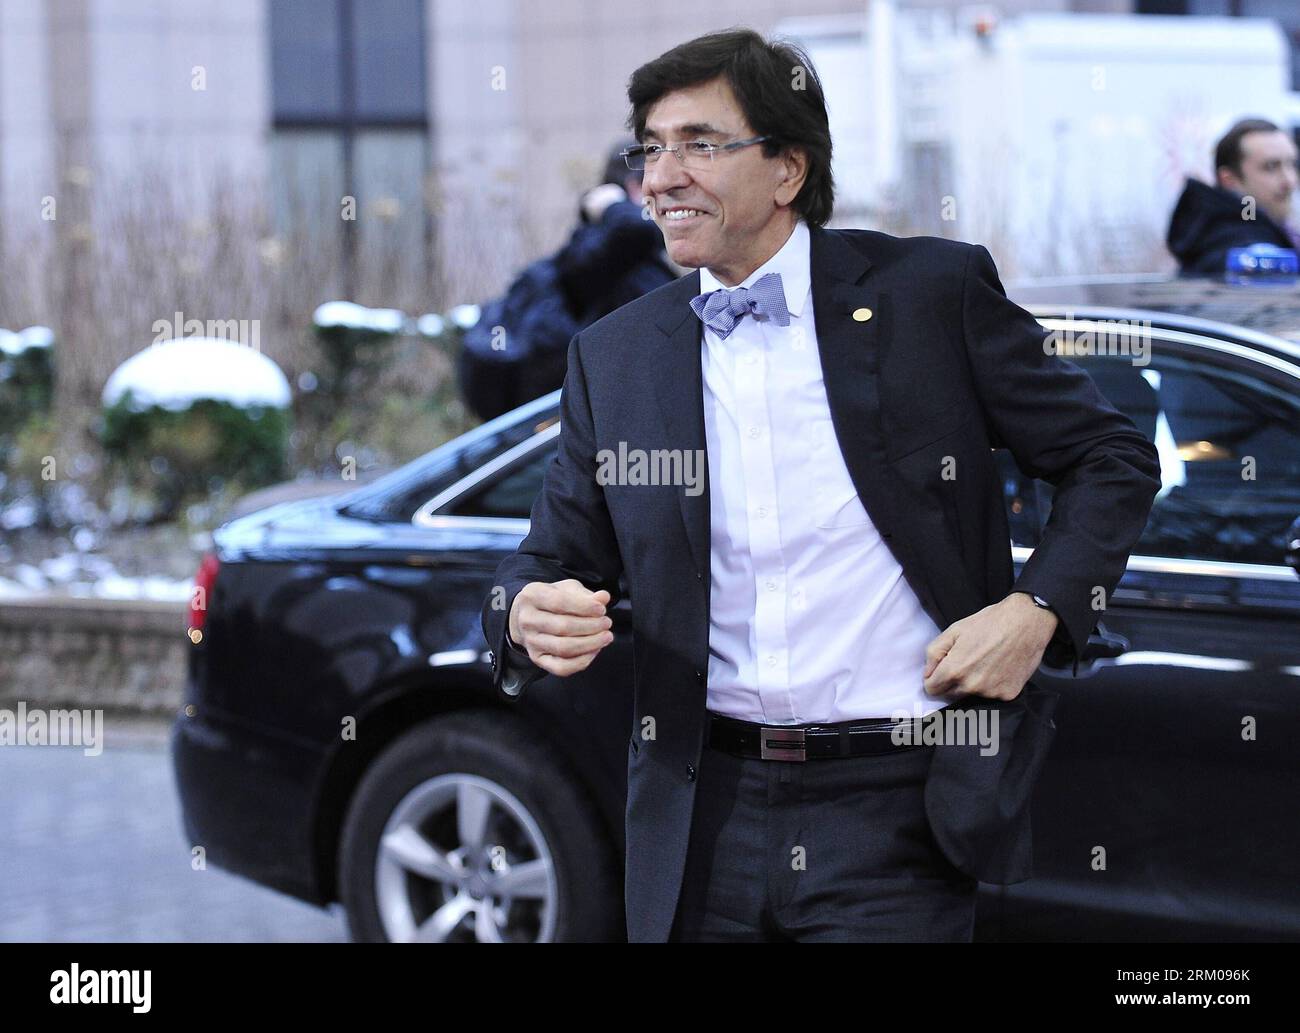 Bildnummer: 59354912  Datum: 14.03.2013  Copyright: imago/Xinhua (130314) -- BRUSSELS, March. 14, 2013 (Xinhua) -- Belgian Prime Minister Elio Di Rupo arrives at EU headquarters for an EU summit in Brussels, capital of Belgium, March 14, 2013. European Union (EU) leaders gathered in Brussels Thursday for a two-day spring summit in an attempt to strike a difficult balance between growth and austerity as the sovereign debt crisis across Europe is finally easing. (Xinhua/Ye Pingfan)(yt) BELGIUM-EU-SUMMIT PUBLICATIONxNOTxINxCHN Politik people Gipfel Gipfeltreffen premiumd x0x xac 2013 quer      59 Stock Photo